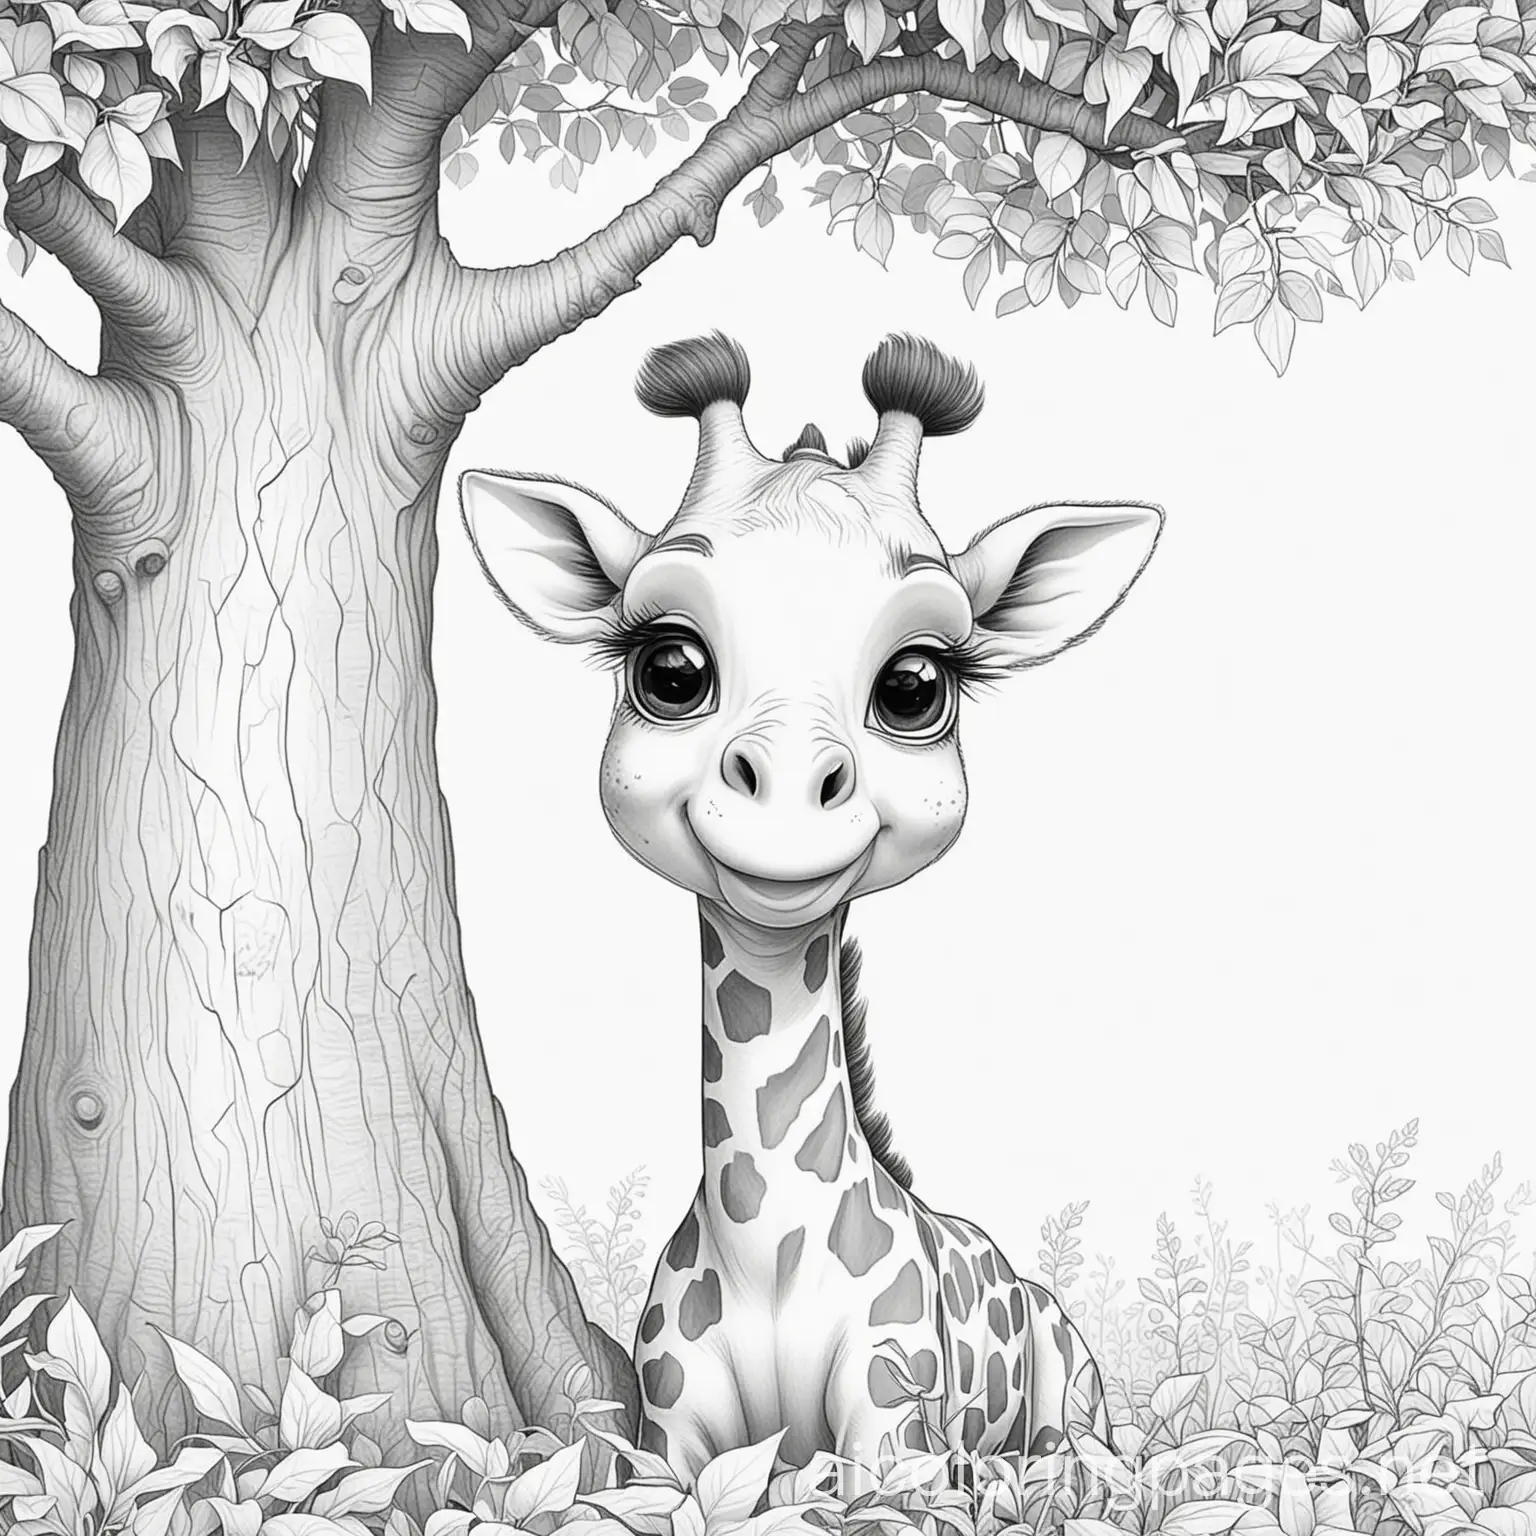 cartoon happy giraffe hiding behind a tree, Coloring Page, black and white, line art, white background, Simplicity, Ample White Space. The background of the coloring page is plain white to make it easy for young children to color within the lines. The outlines of all the subjects are easy to distinguish, making it simple for kids to color without too much difficulty